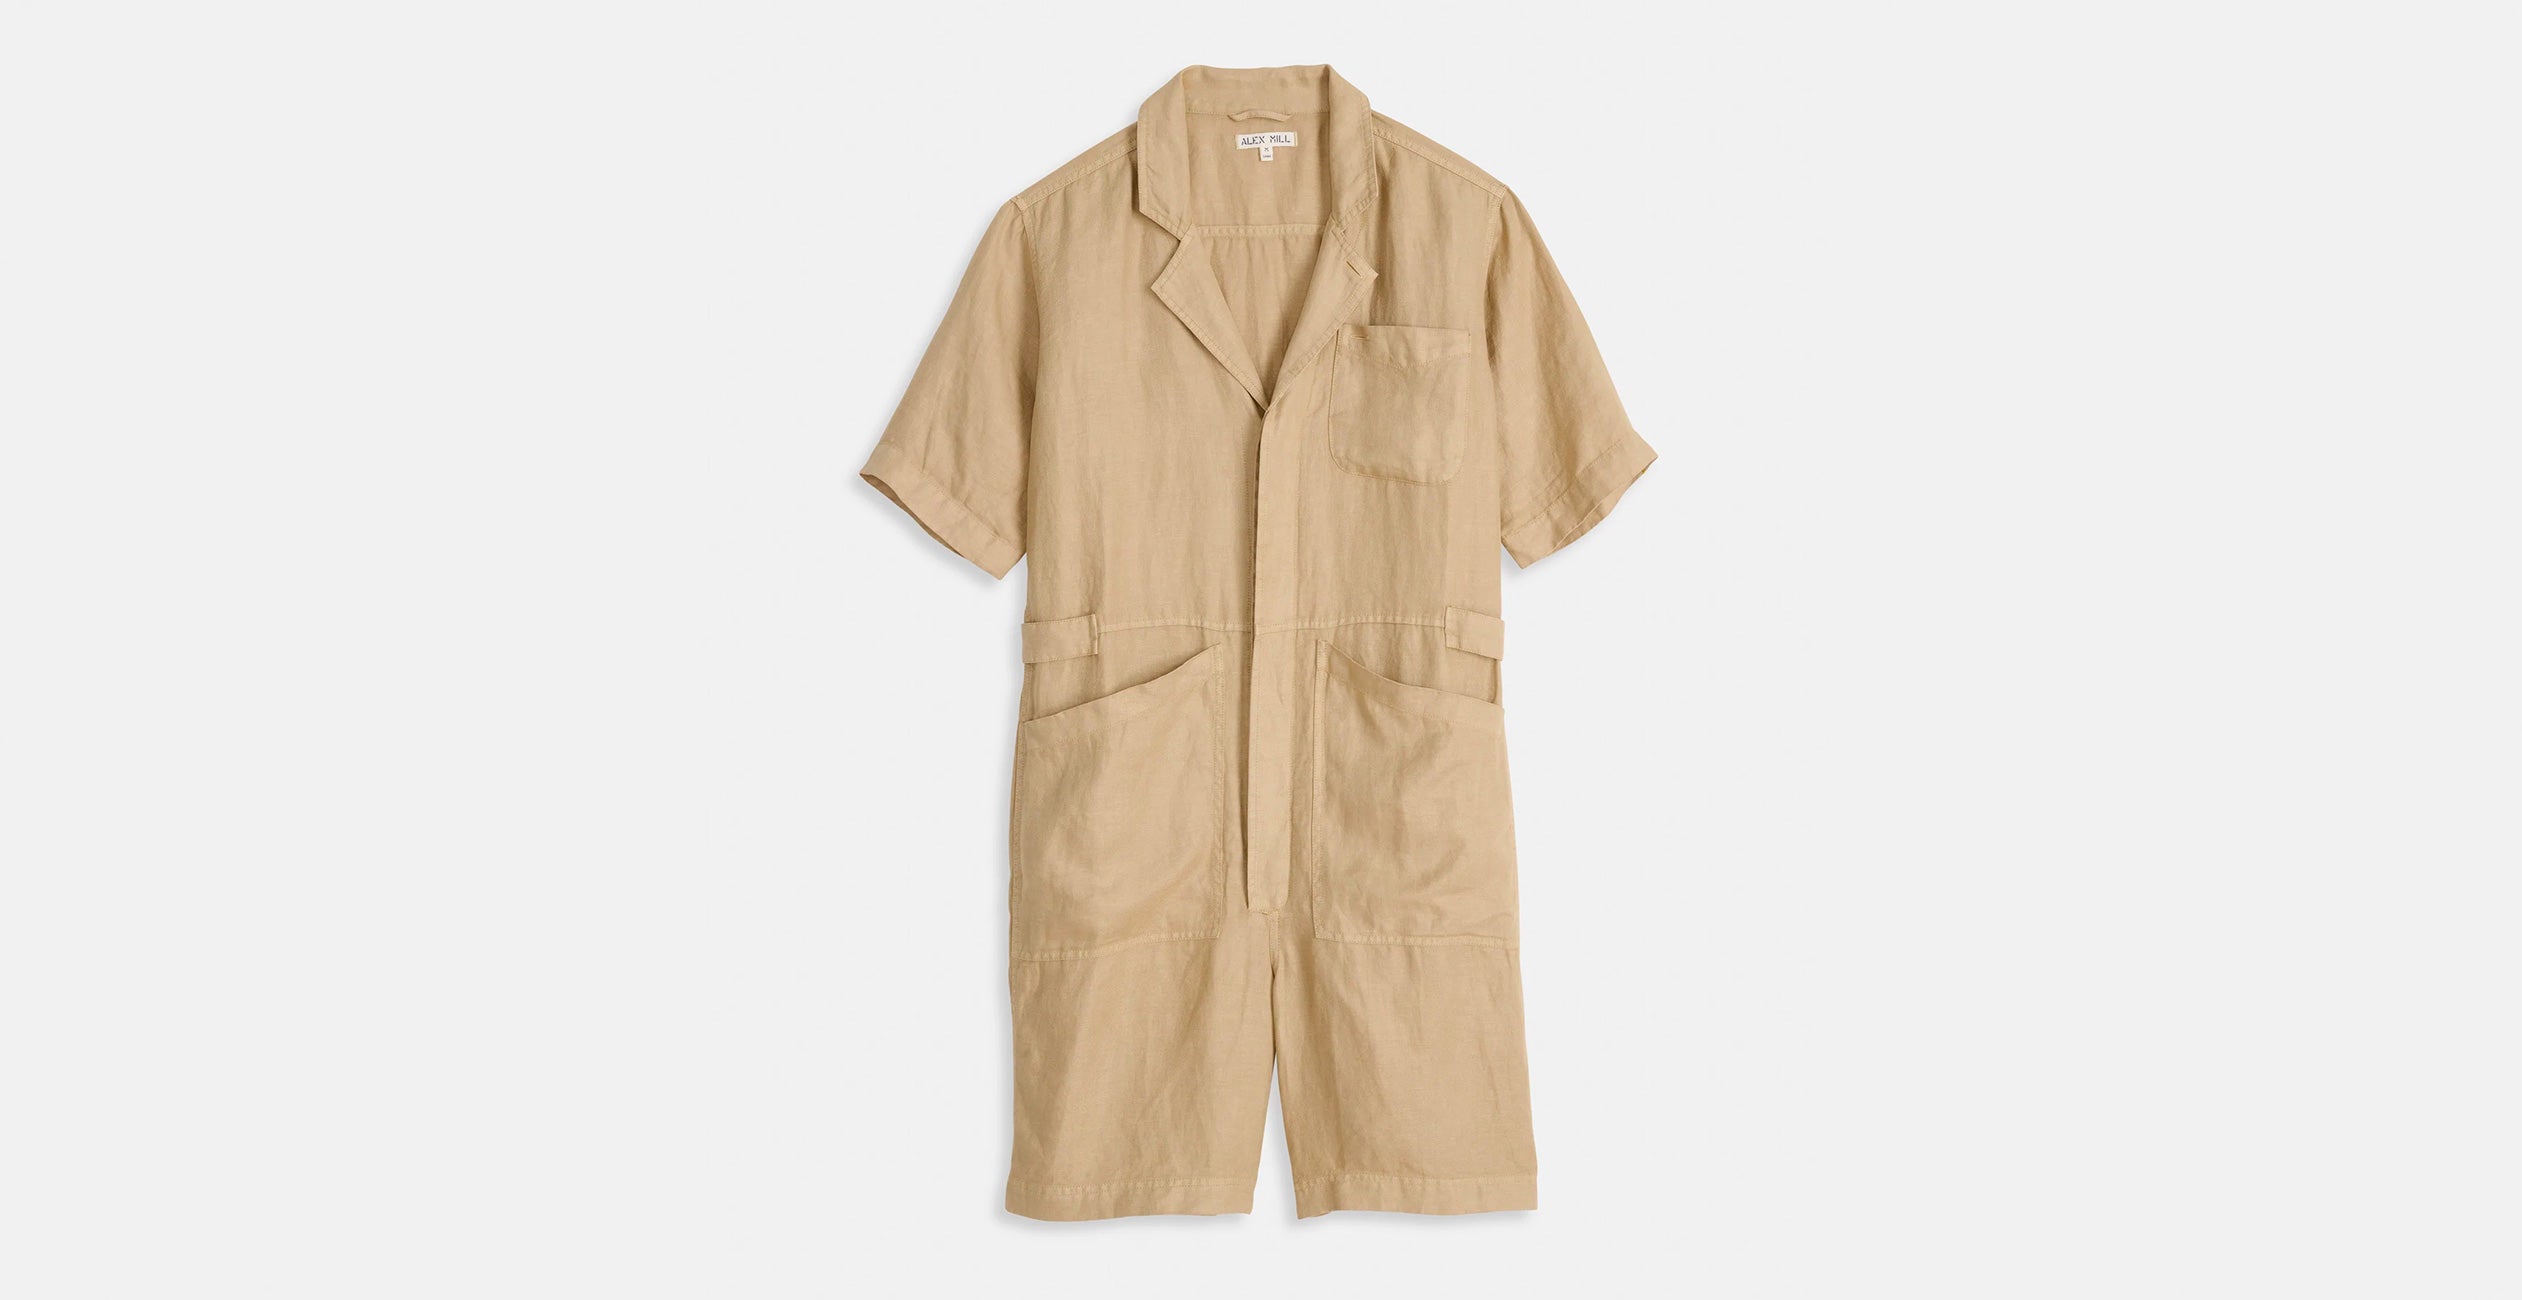 Don’t Mind Me, I’ll Be Wearing This Short Jumpsuit All Summer Long